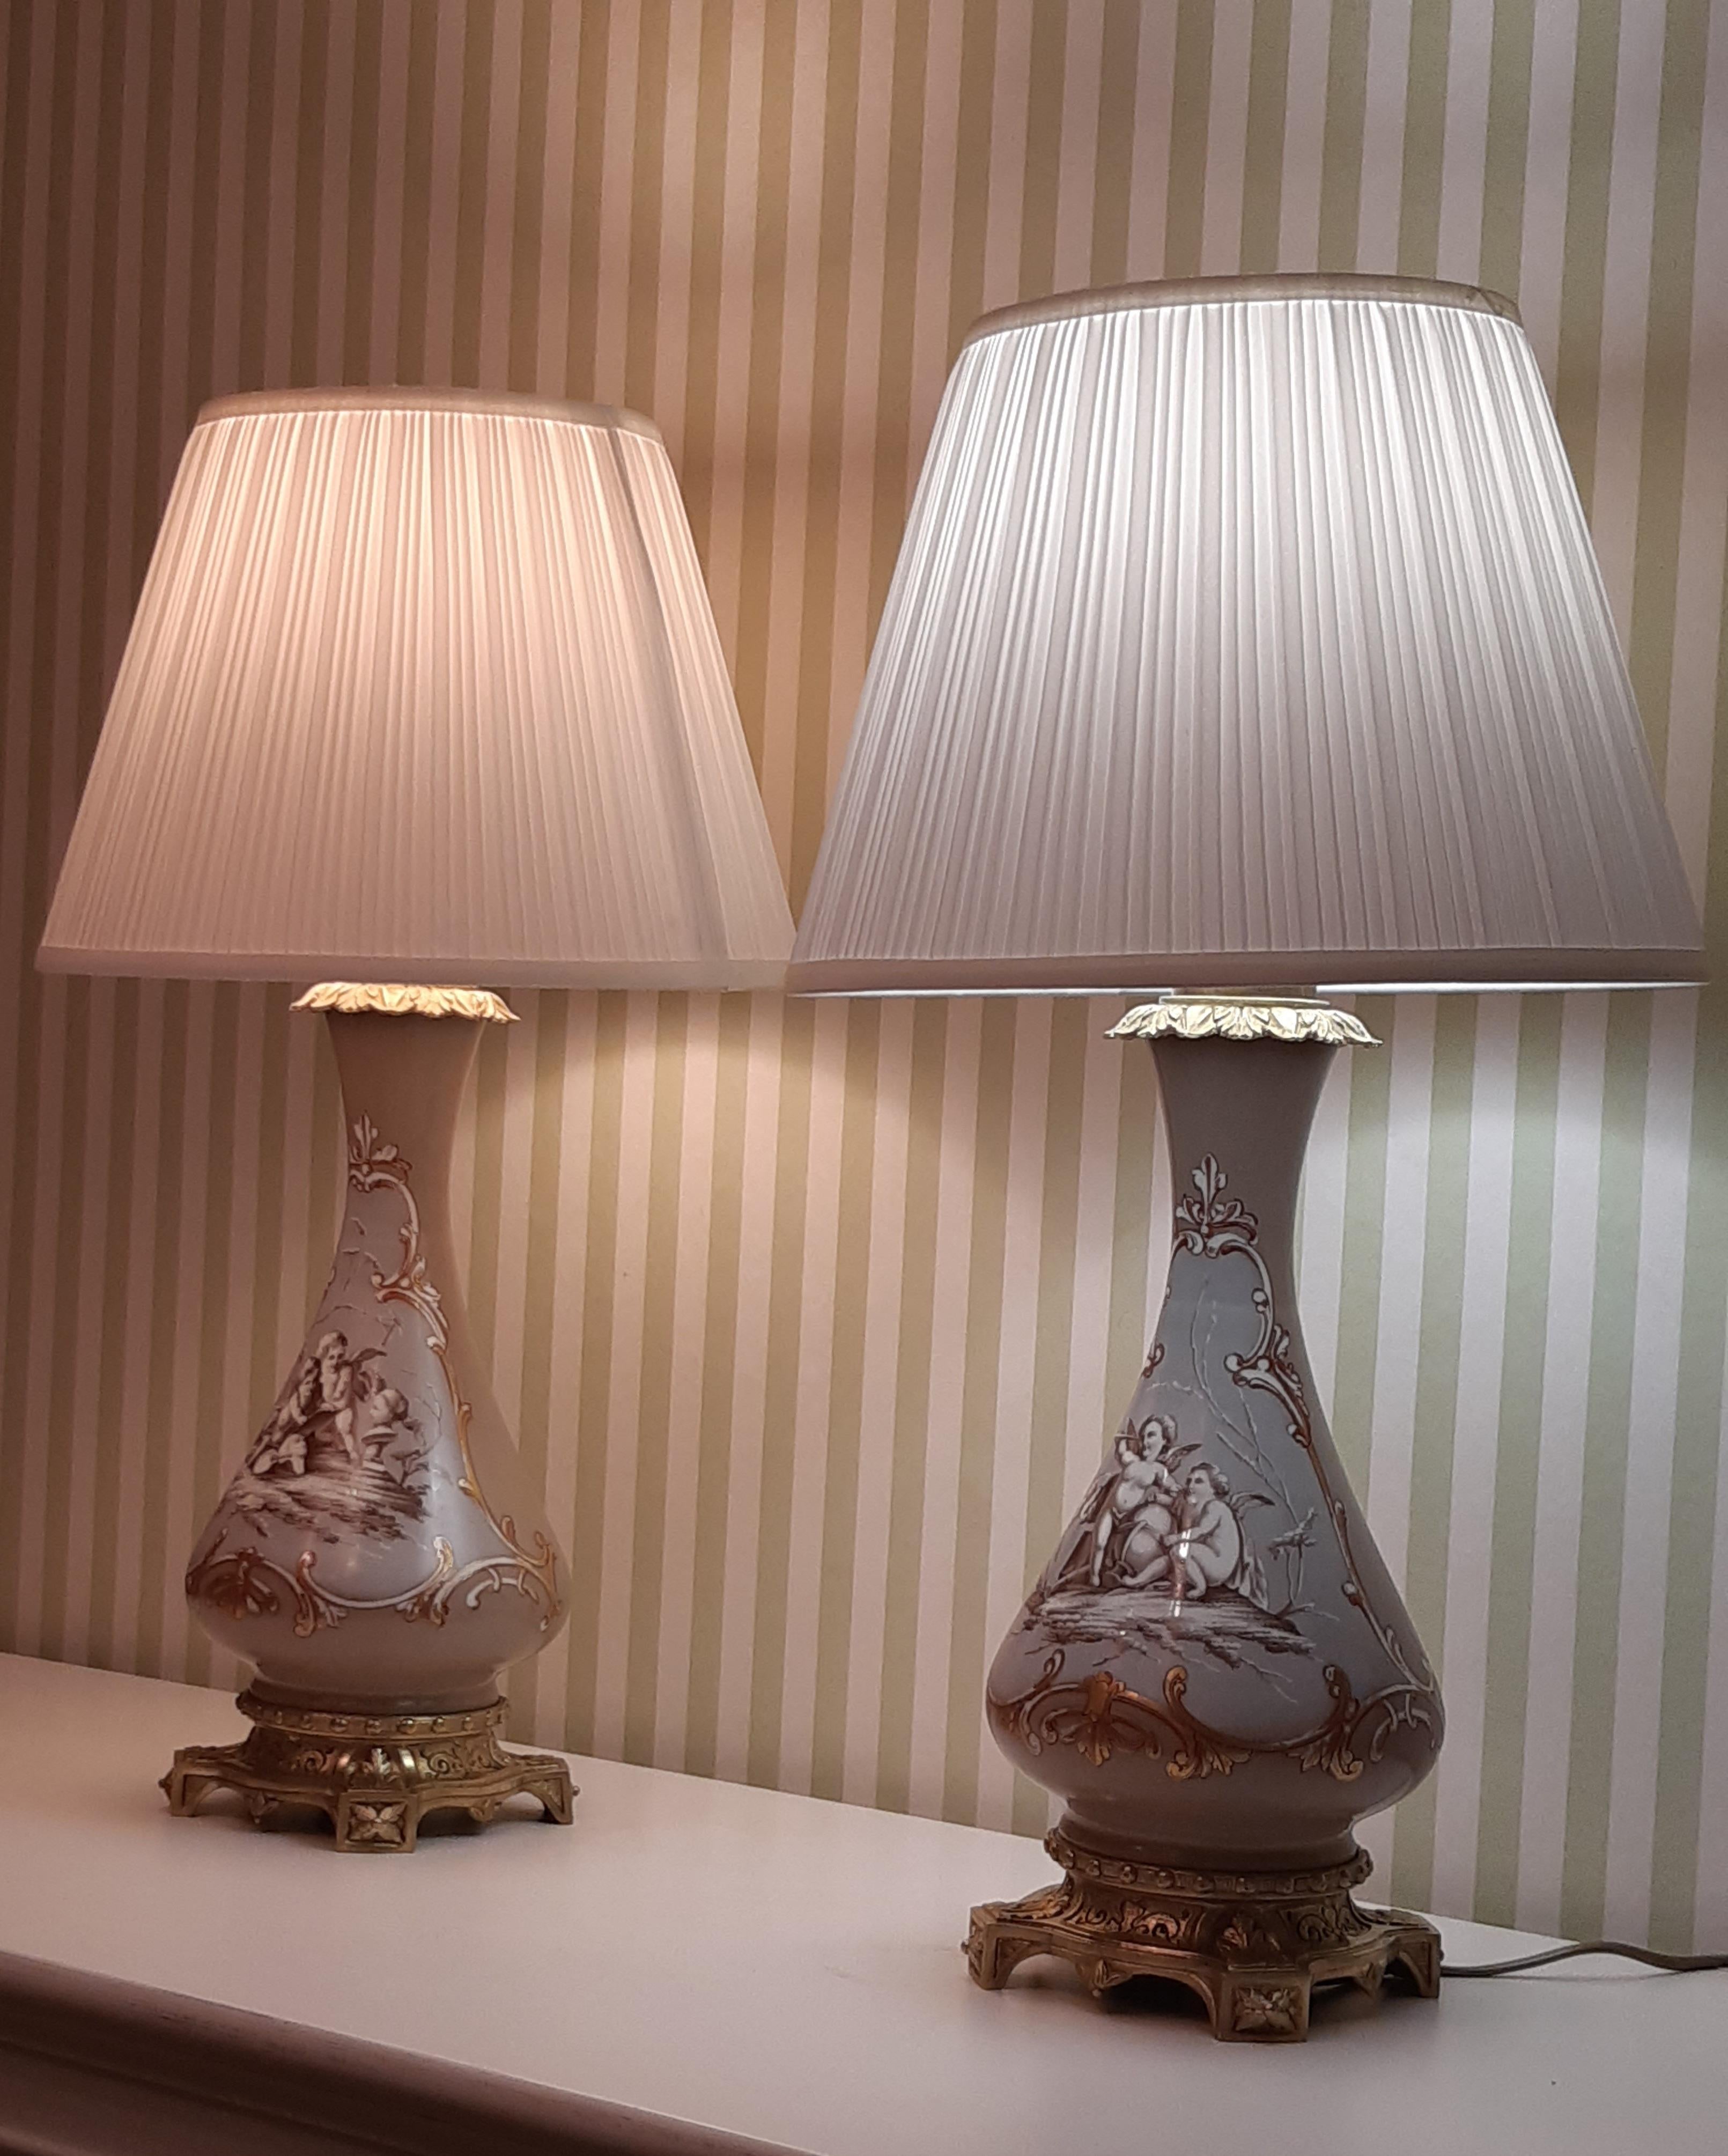 Very nice pair of kerosene lamps, mounted on bronze feet, porcelain reservoirs decorated with cupids and polychrome flowers.
Newly electrified and restored by our workshop.